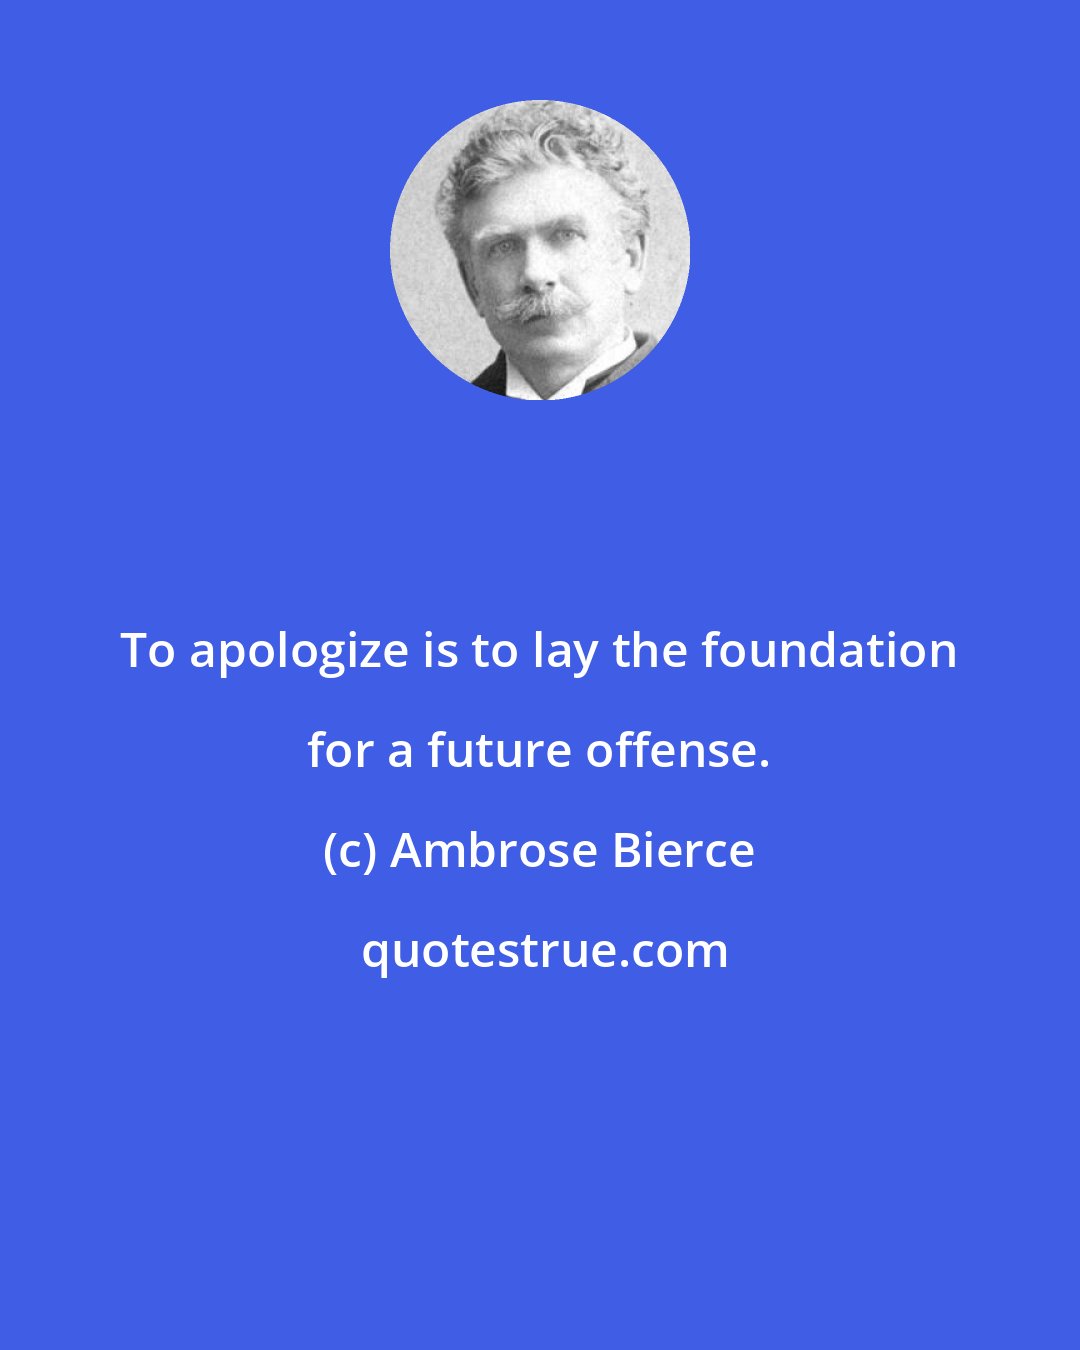 Ambrose Bierce: To apologize is to lay the foundation for a future offense.